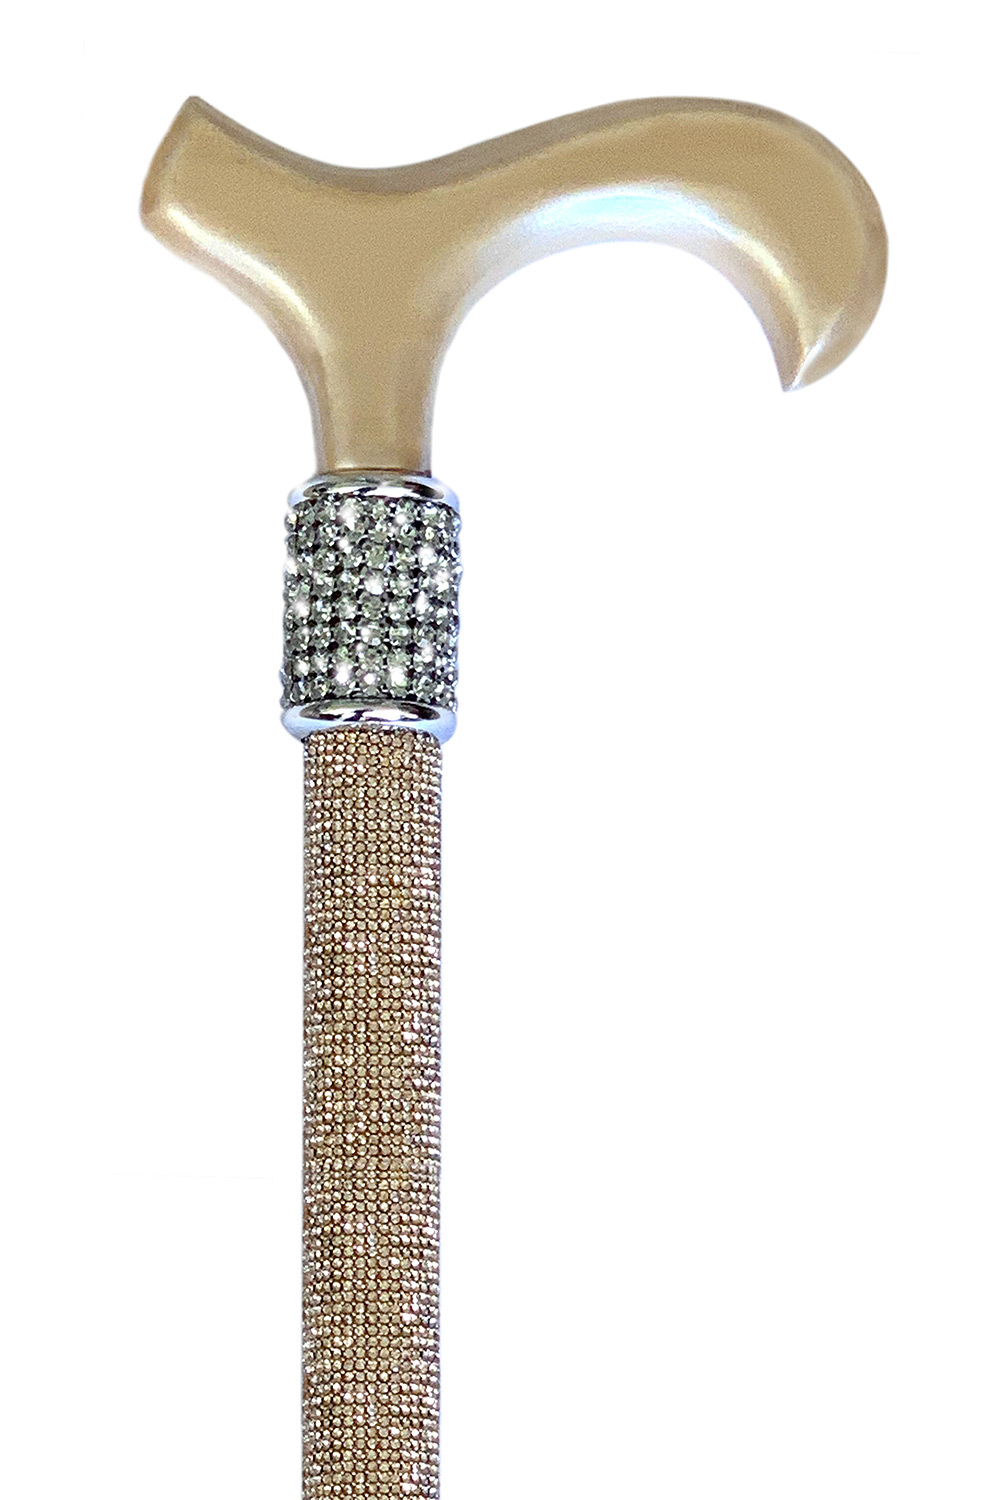 OrthoGlam & # 34; Lavender Ice & # 34; Crystal Rhinestone Bedazzled Fashion  Cane - Mai Saurin Bling Wooden Walking Stick for Balance